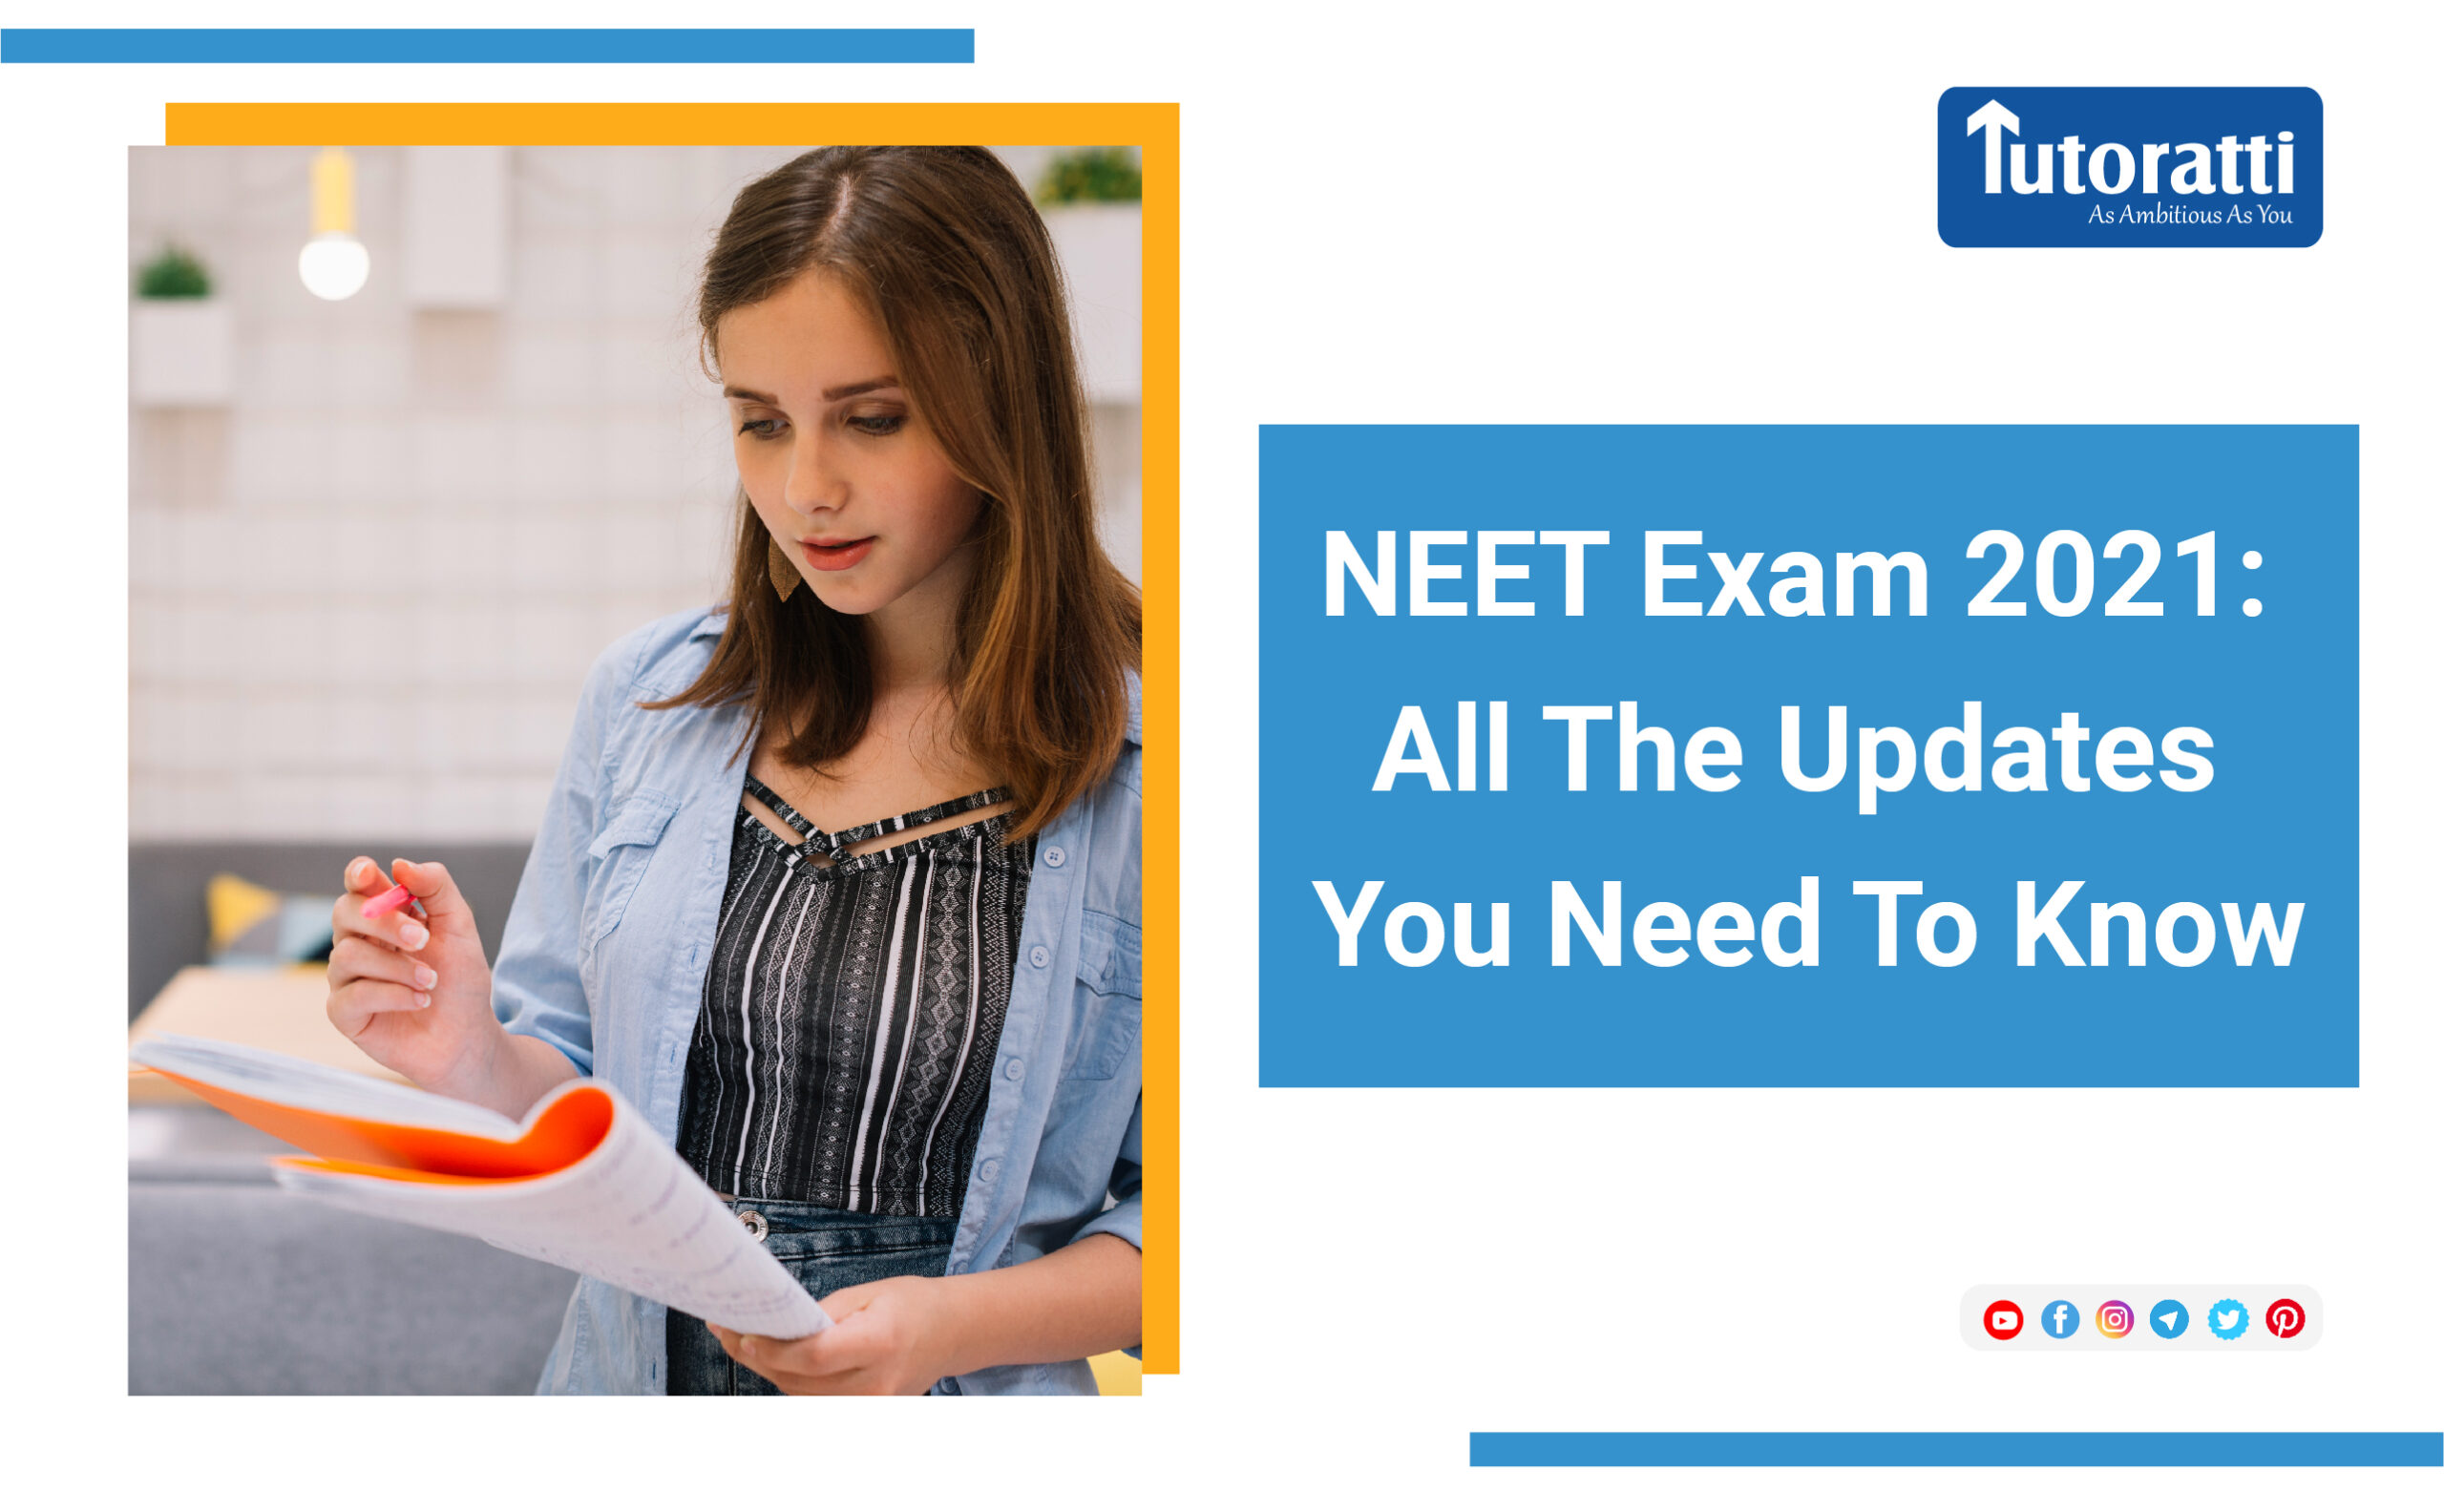 NEET Exam 2021: All The Updates You Need To Know